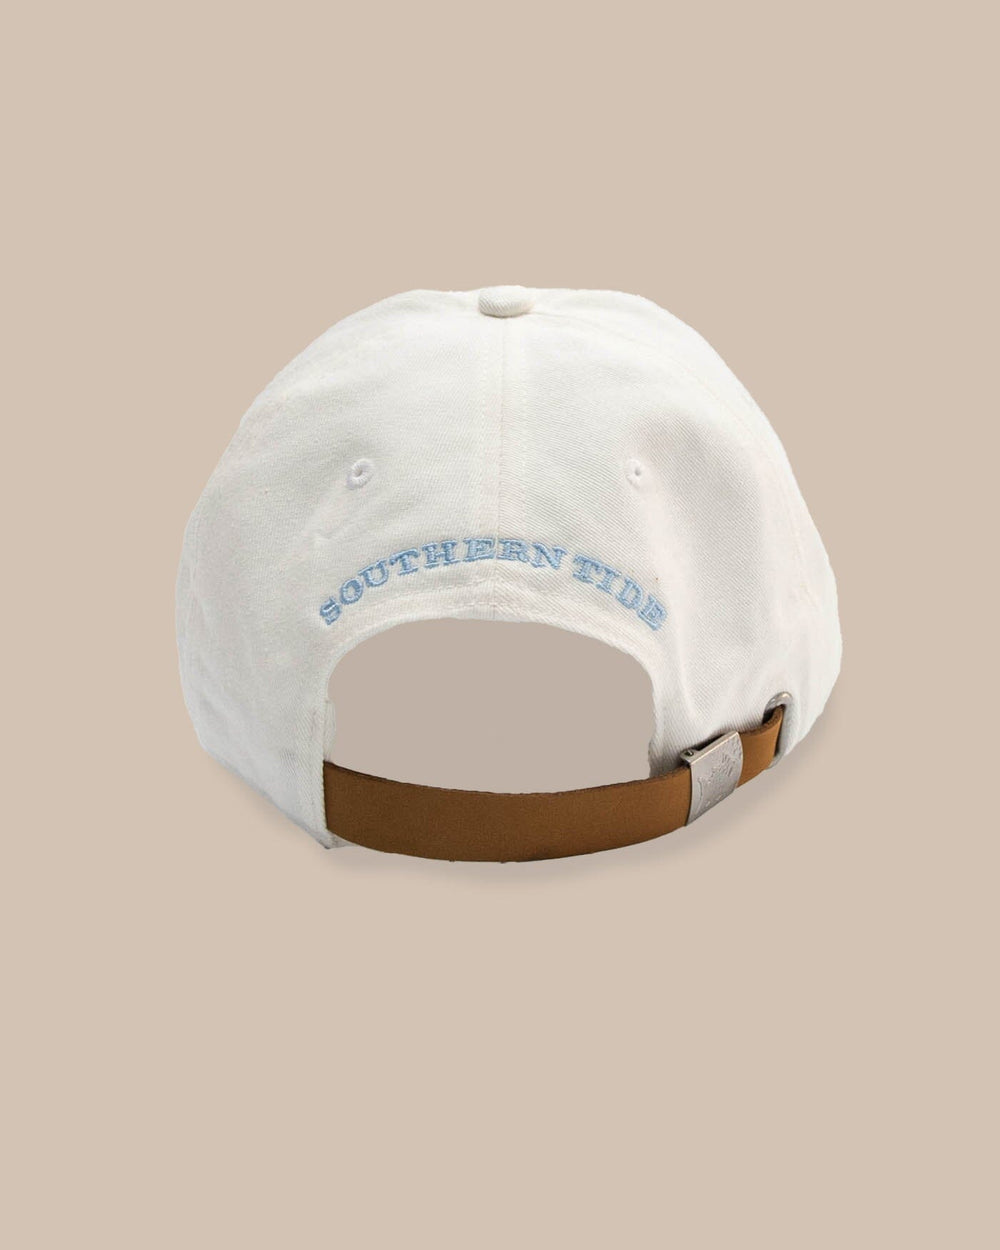 The back view of the Southern Tide Game Set Match Leather Strap Hat by Southern Tide - White